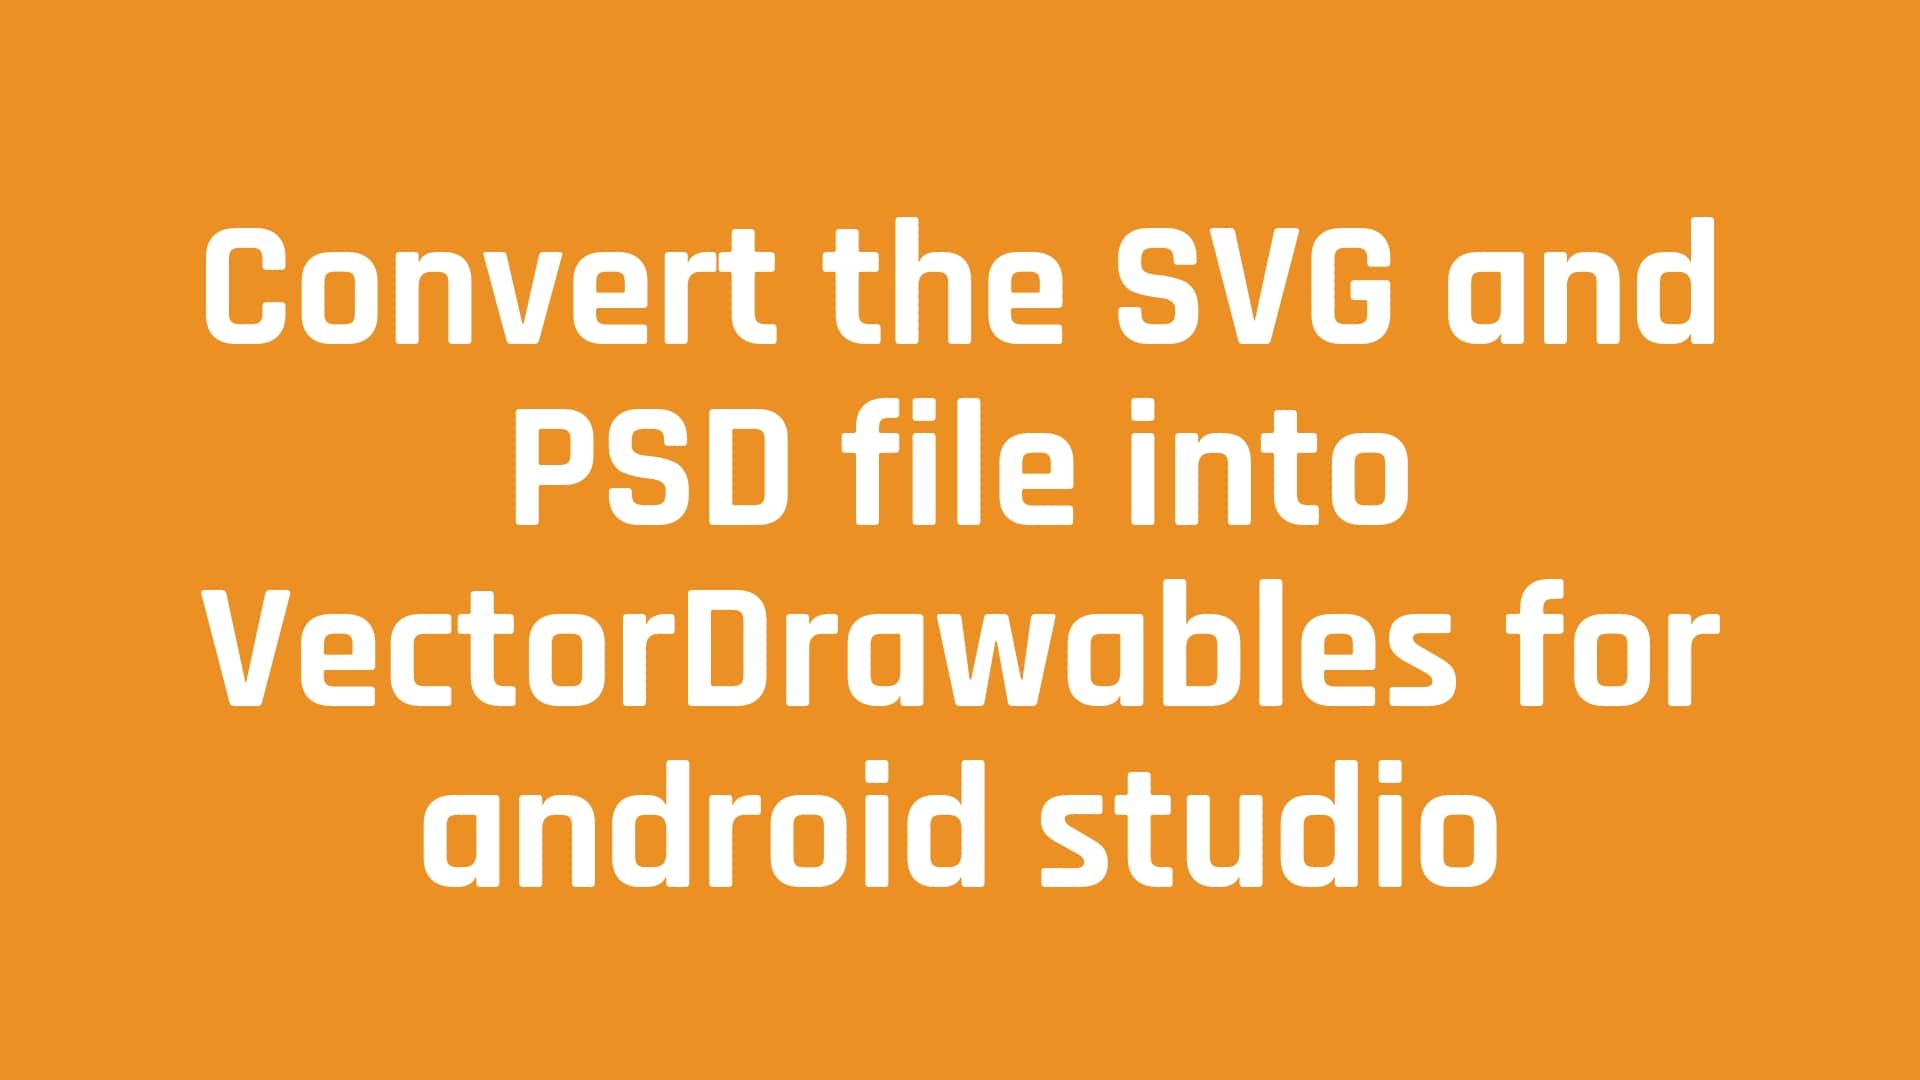 Convert the SVG and PSD image file into png or VectorDrawables for android studio